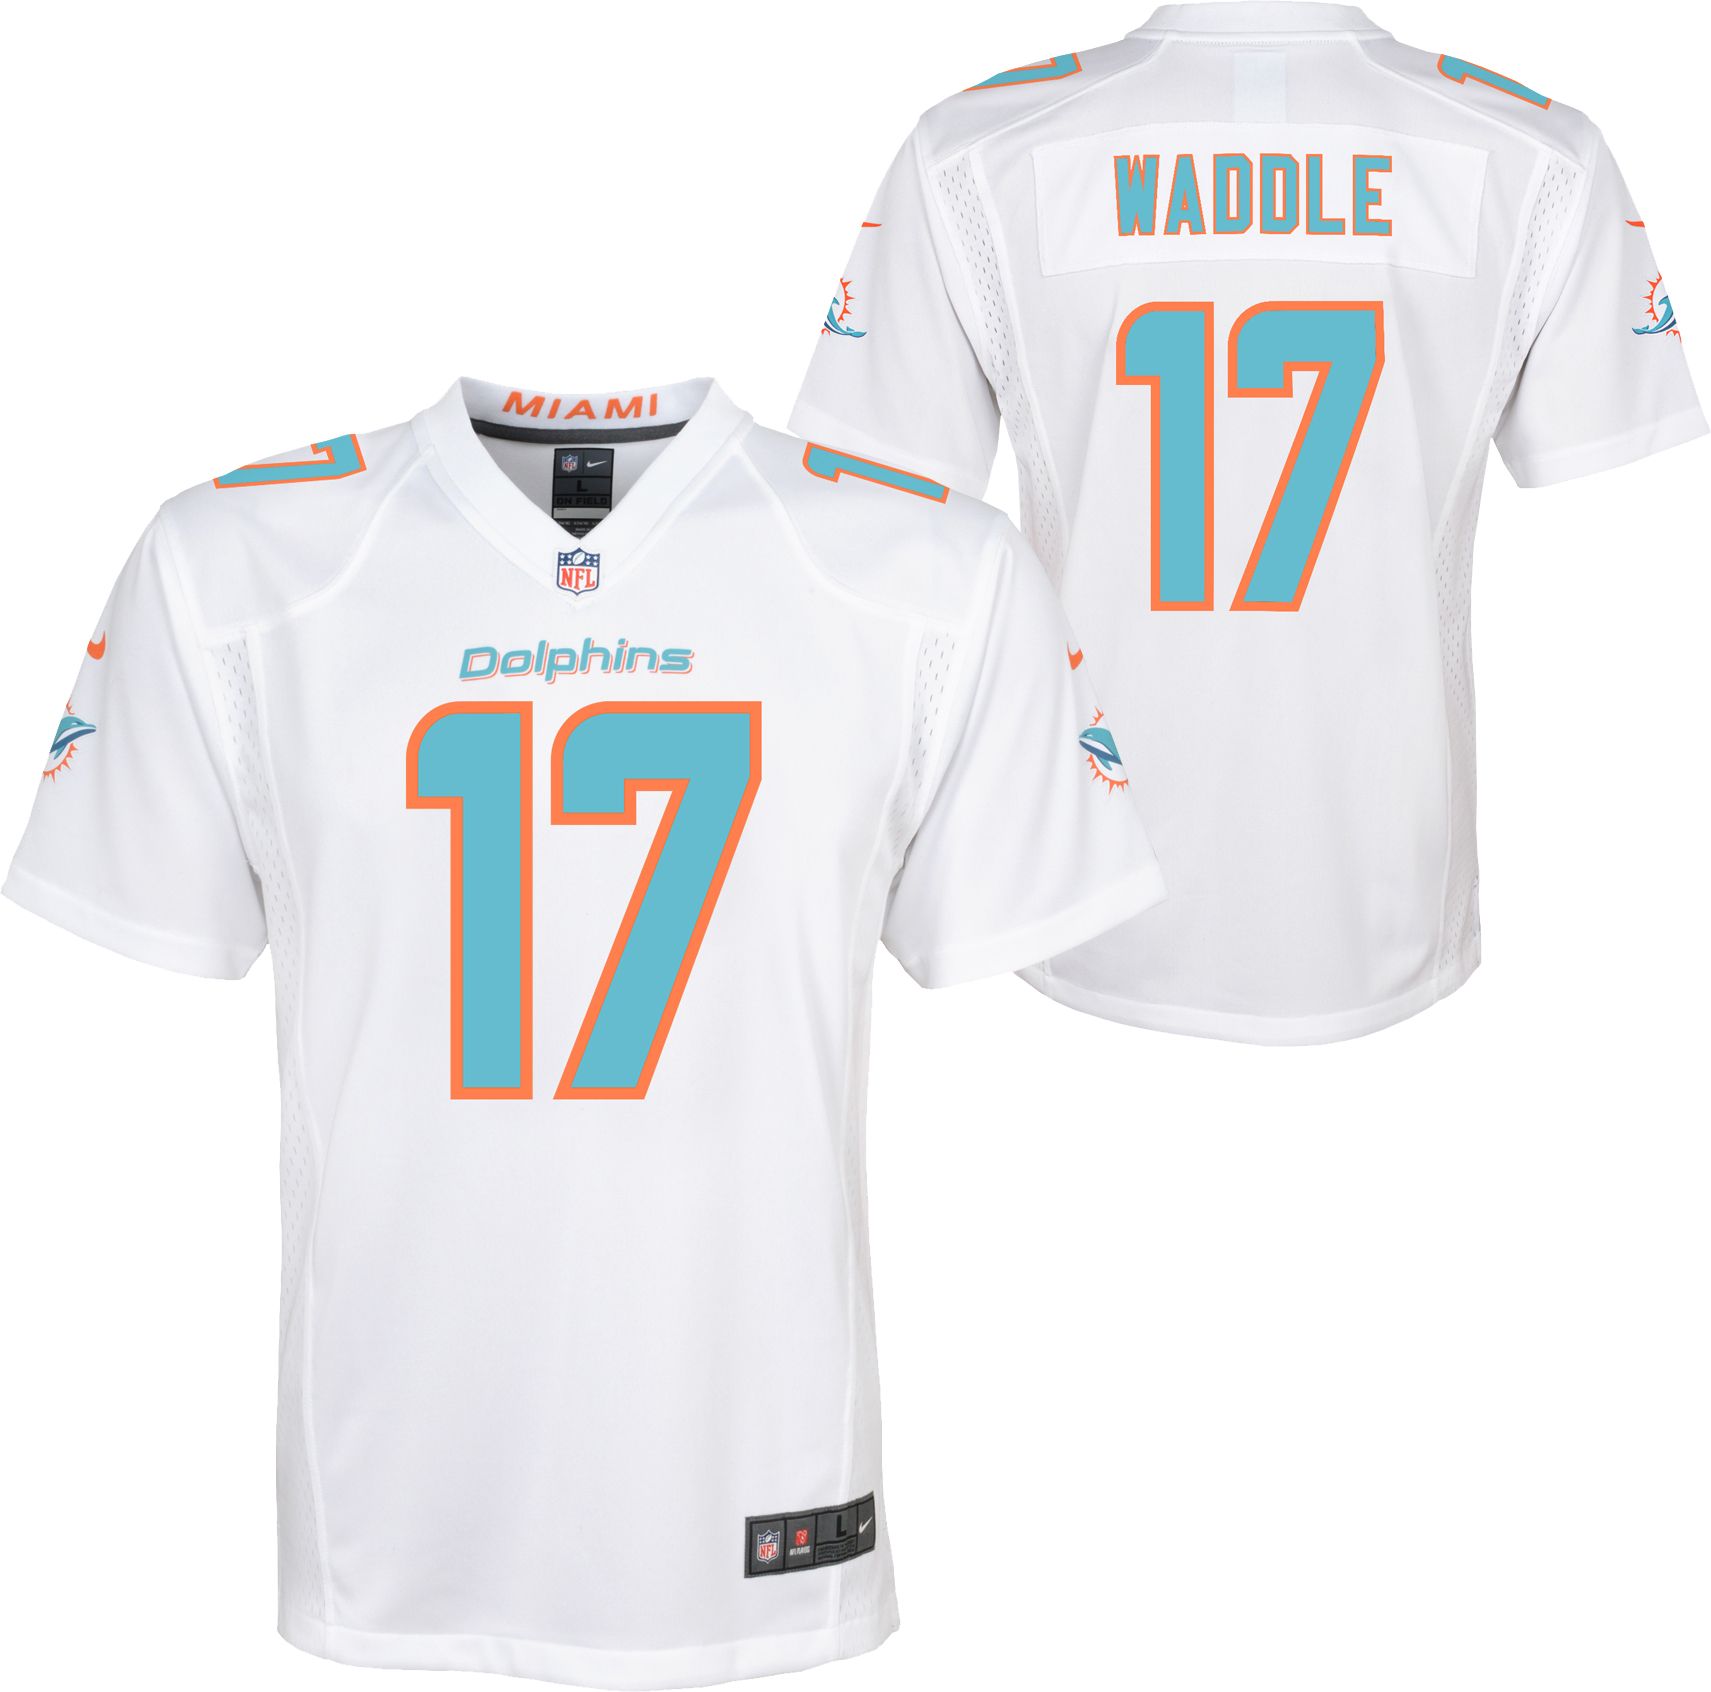 Dolphins jersey for kids